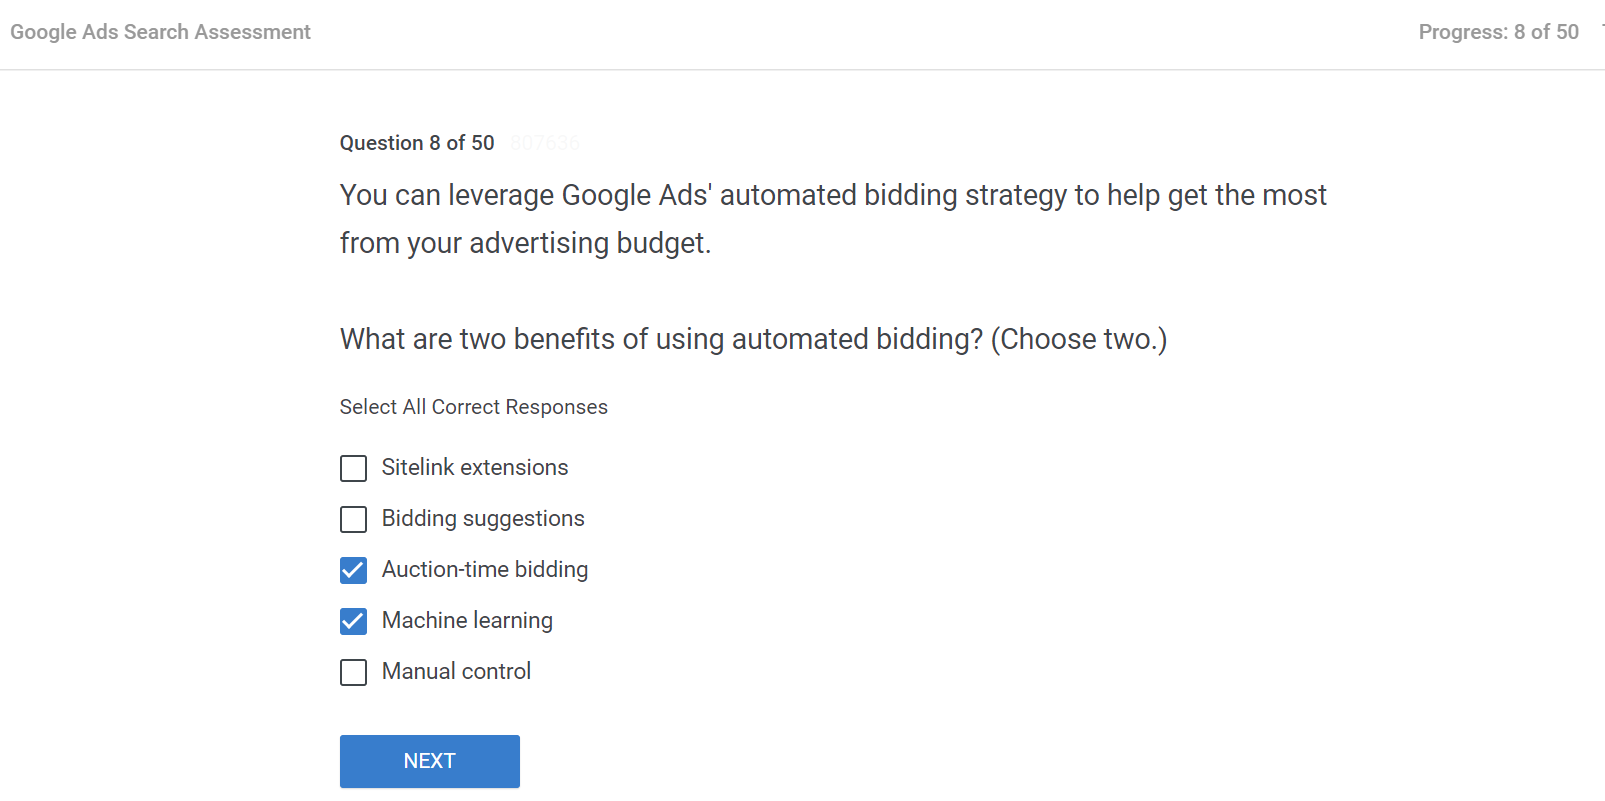 You can leverage Google Ads' automated bidding strategy to help get the most from your advertising budget.